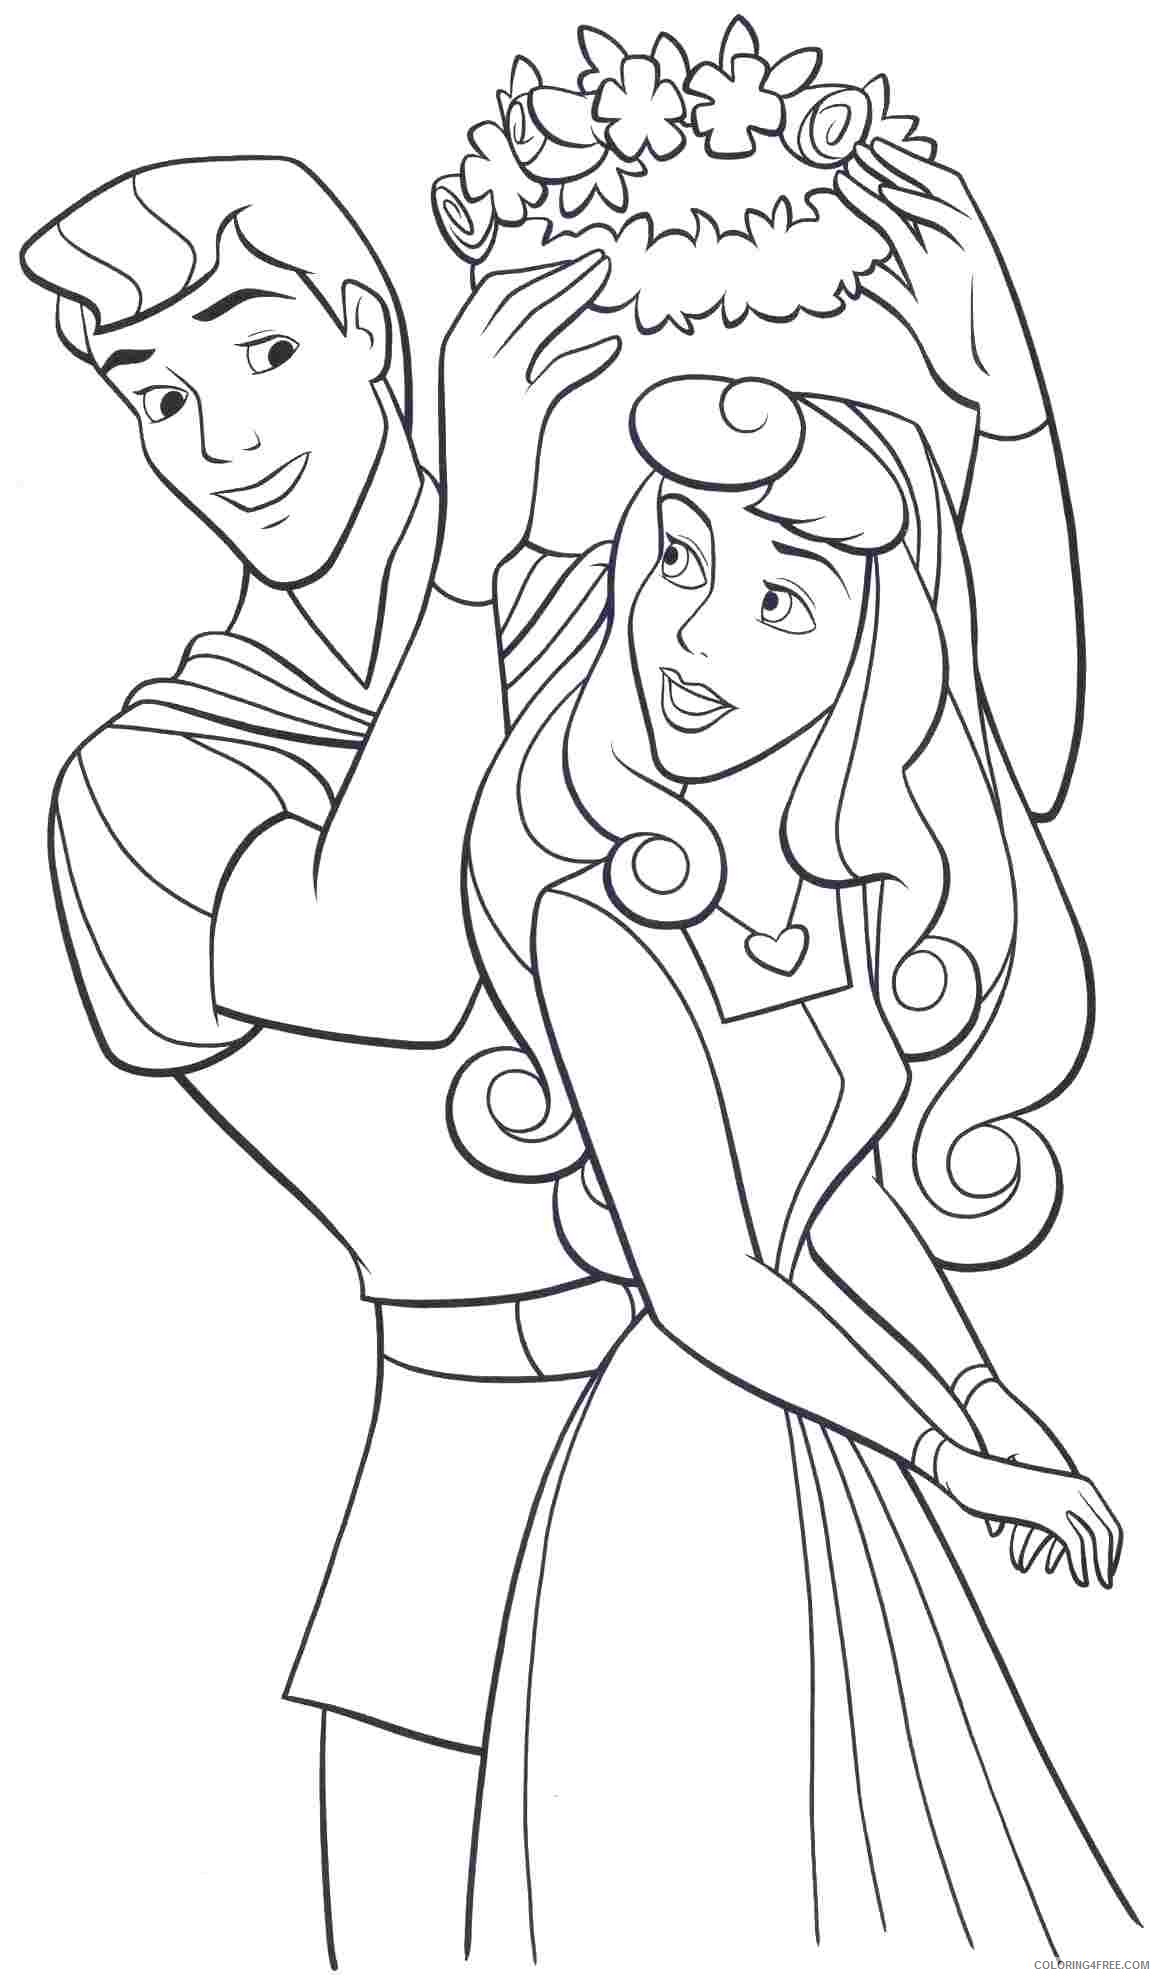 aurora coloring pages with prince phillip Coloring4free